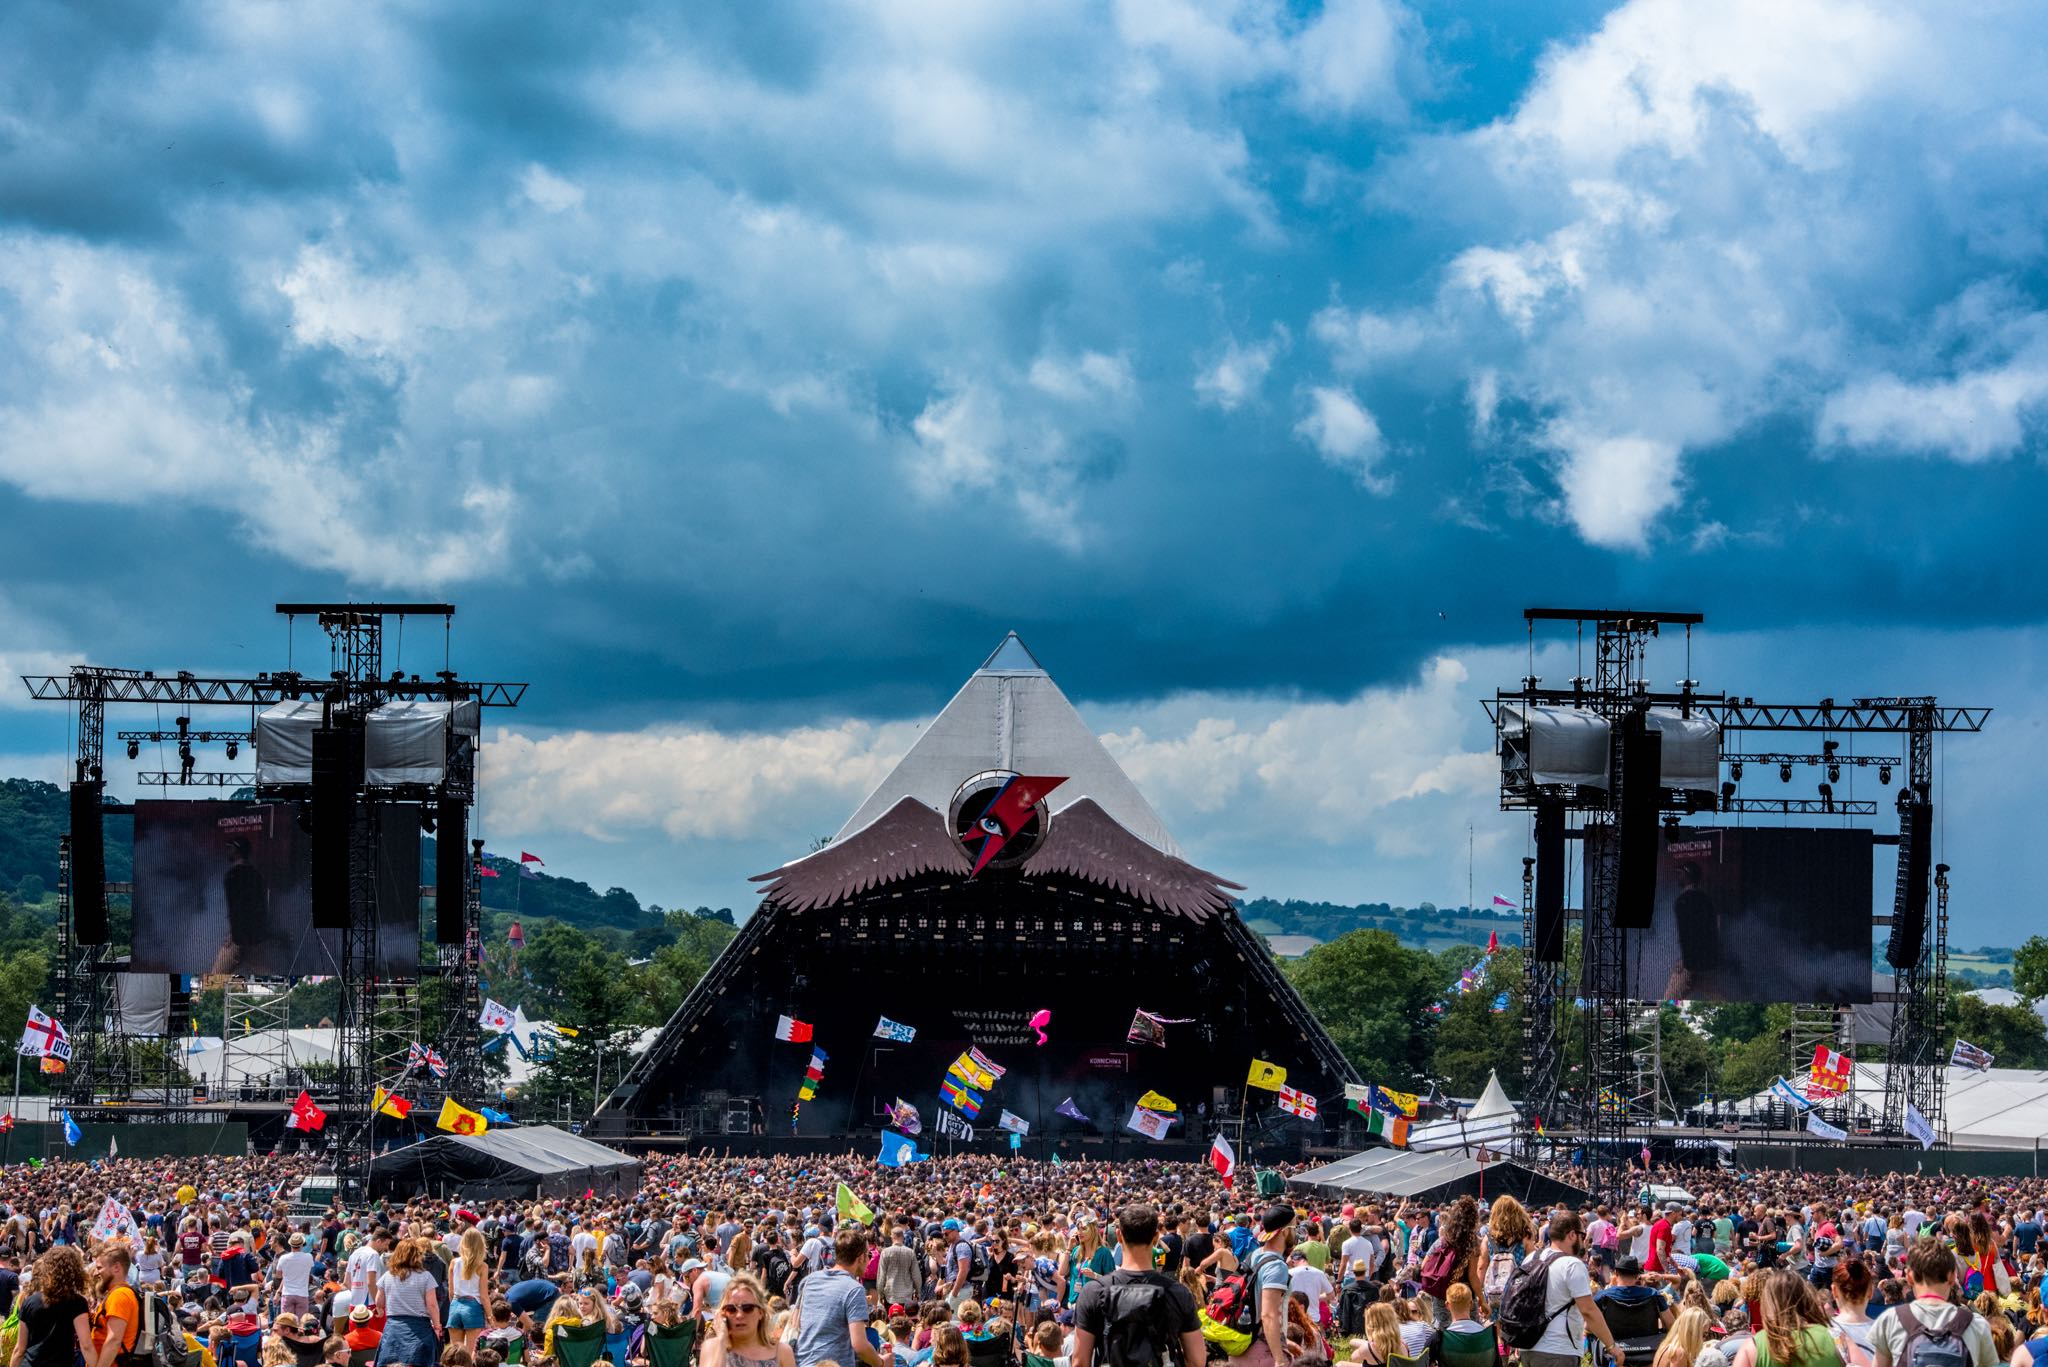 Glastonbury Festival was an unexpected refuge from a mad world